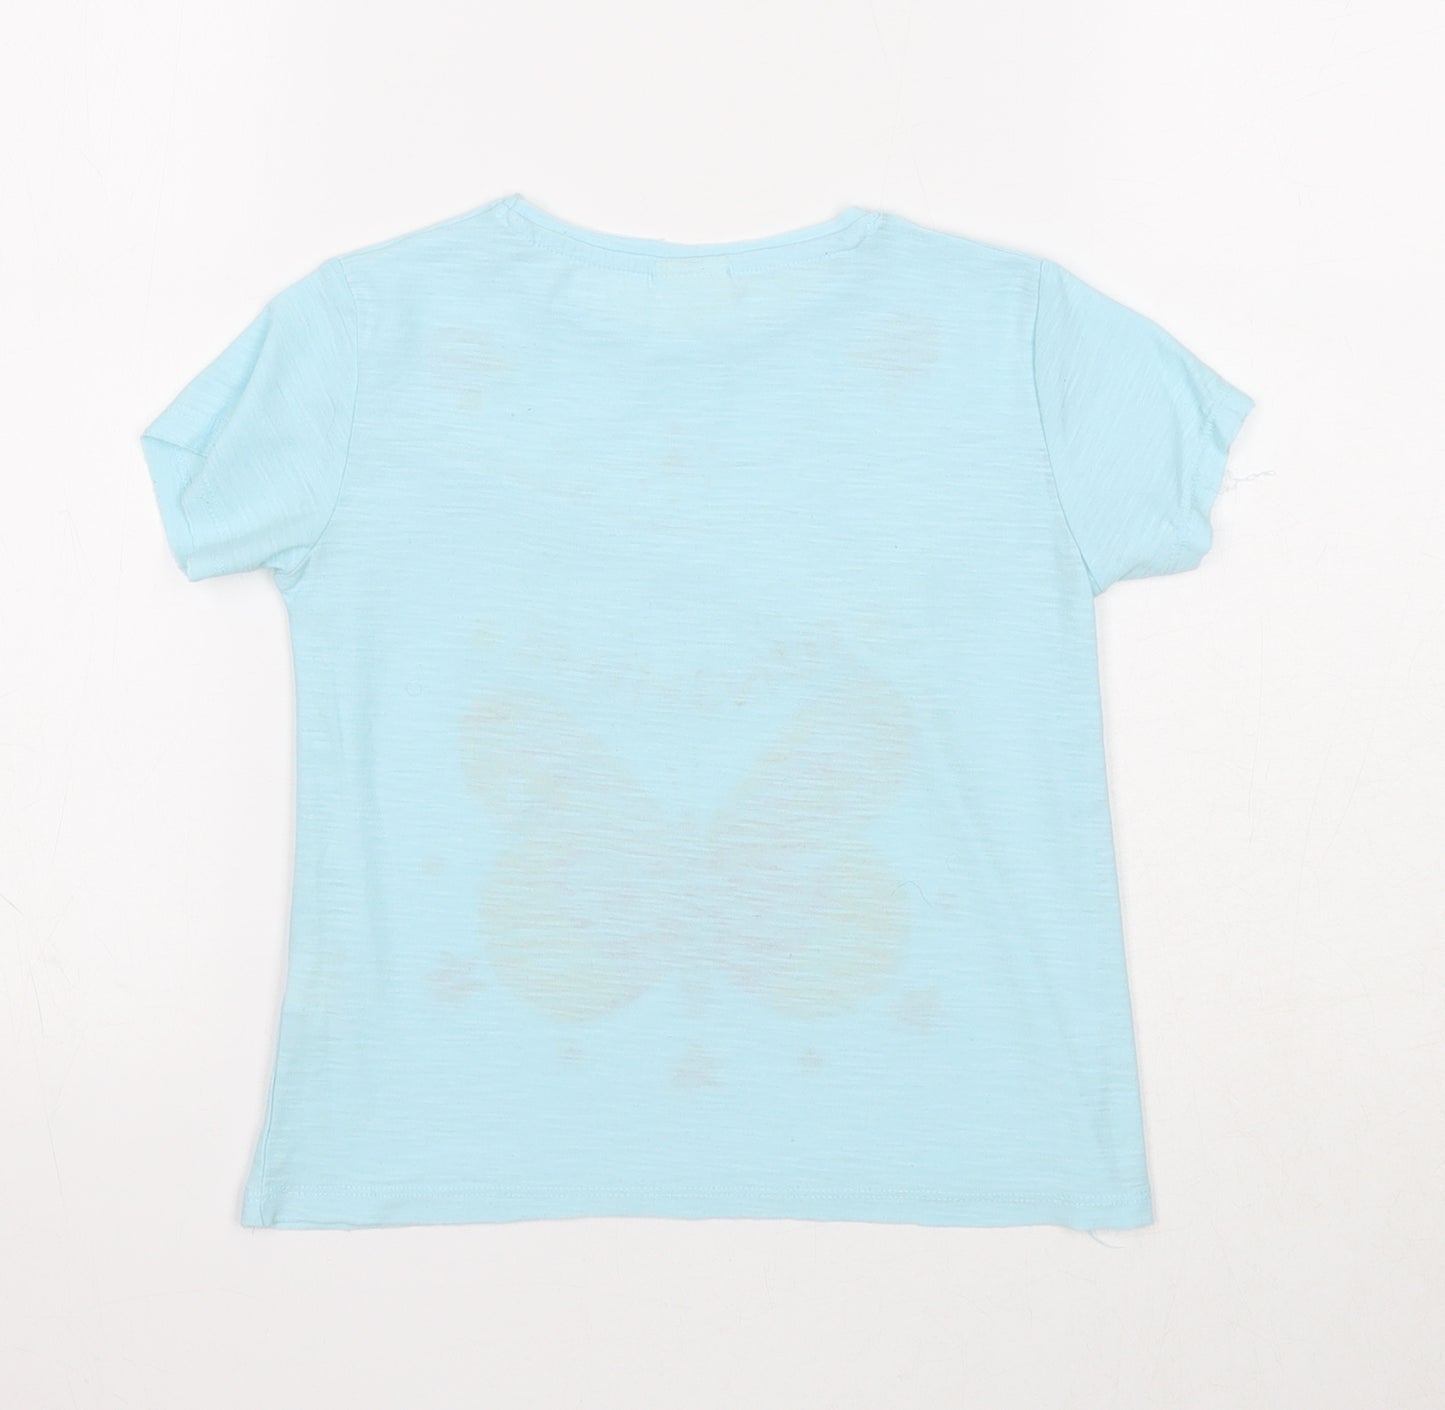 Zara Girls Blue Polyester Basic T-Shirt Size 6 Years Round Neck Pullover - Butterfly